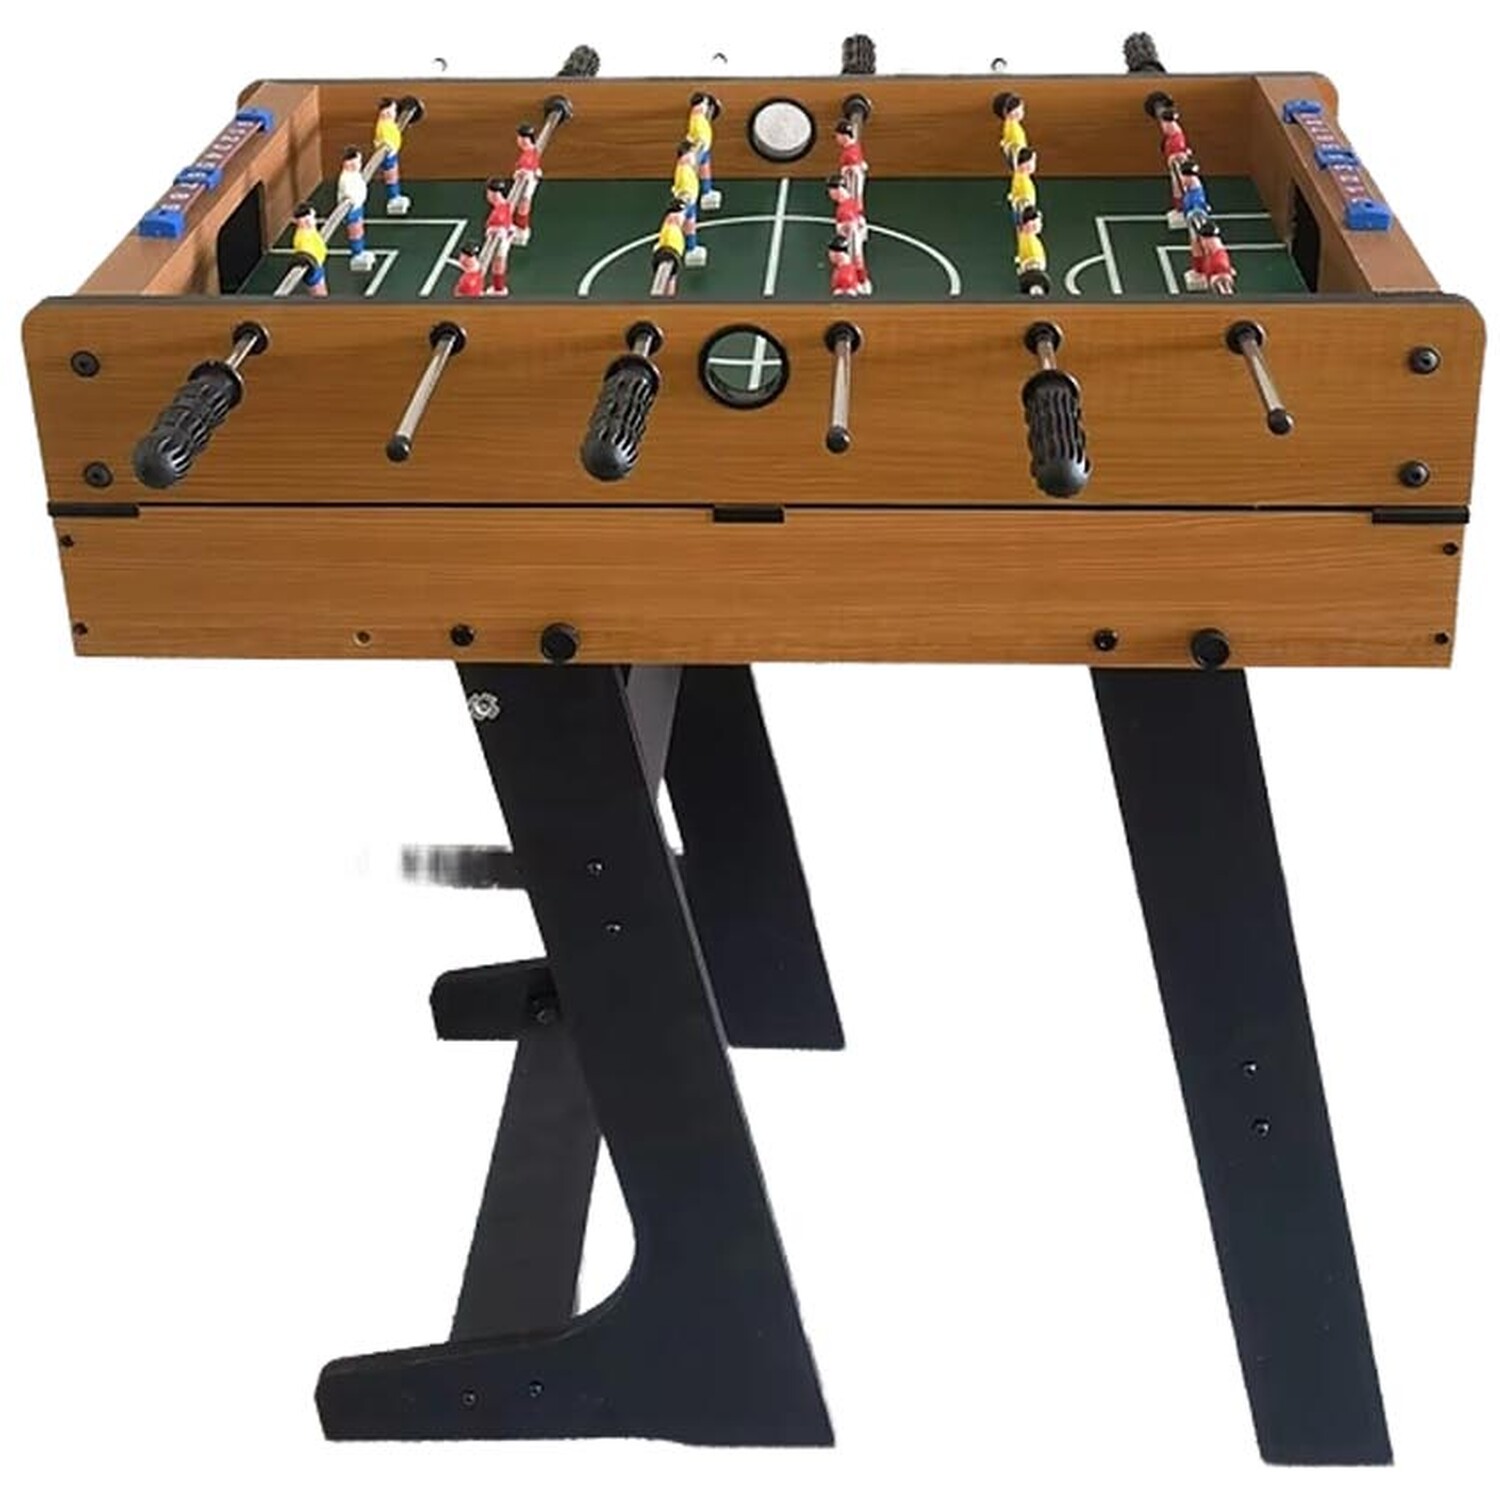 3-in-1 Games Table - Brown Image 3